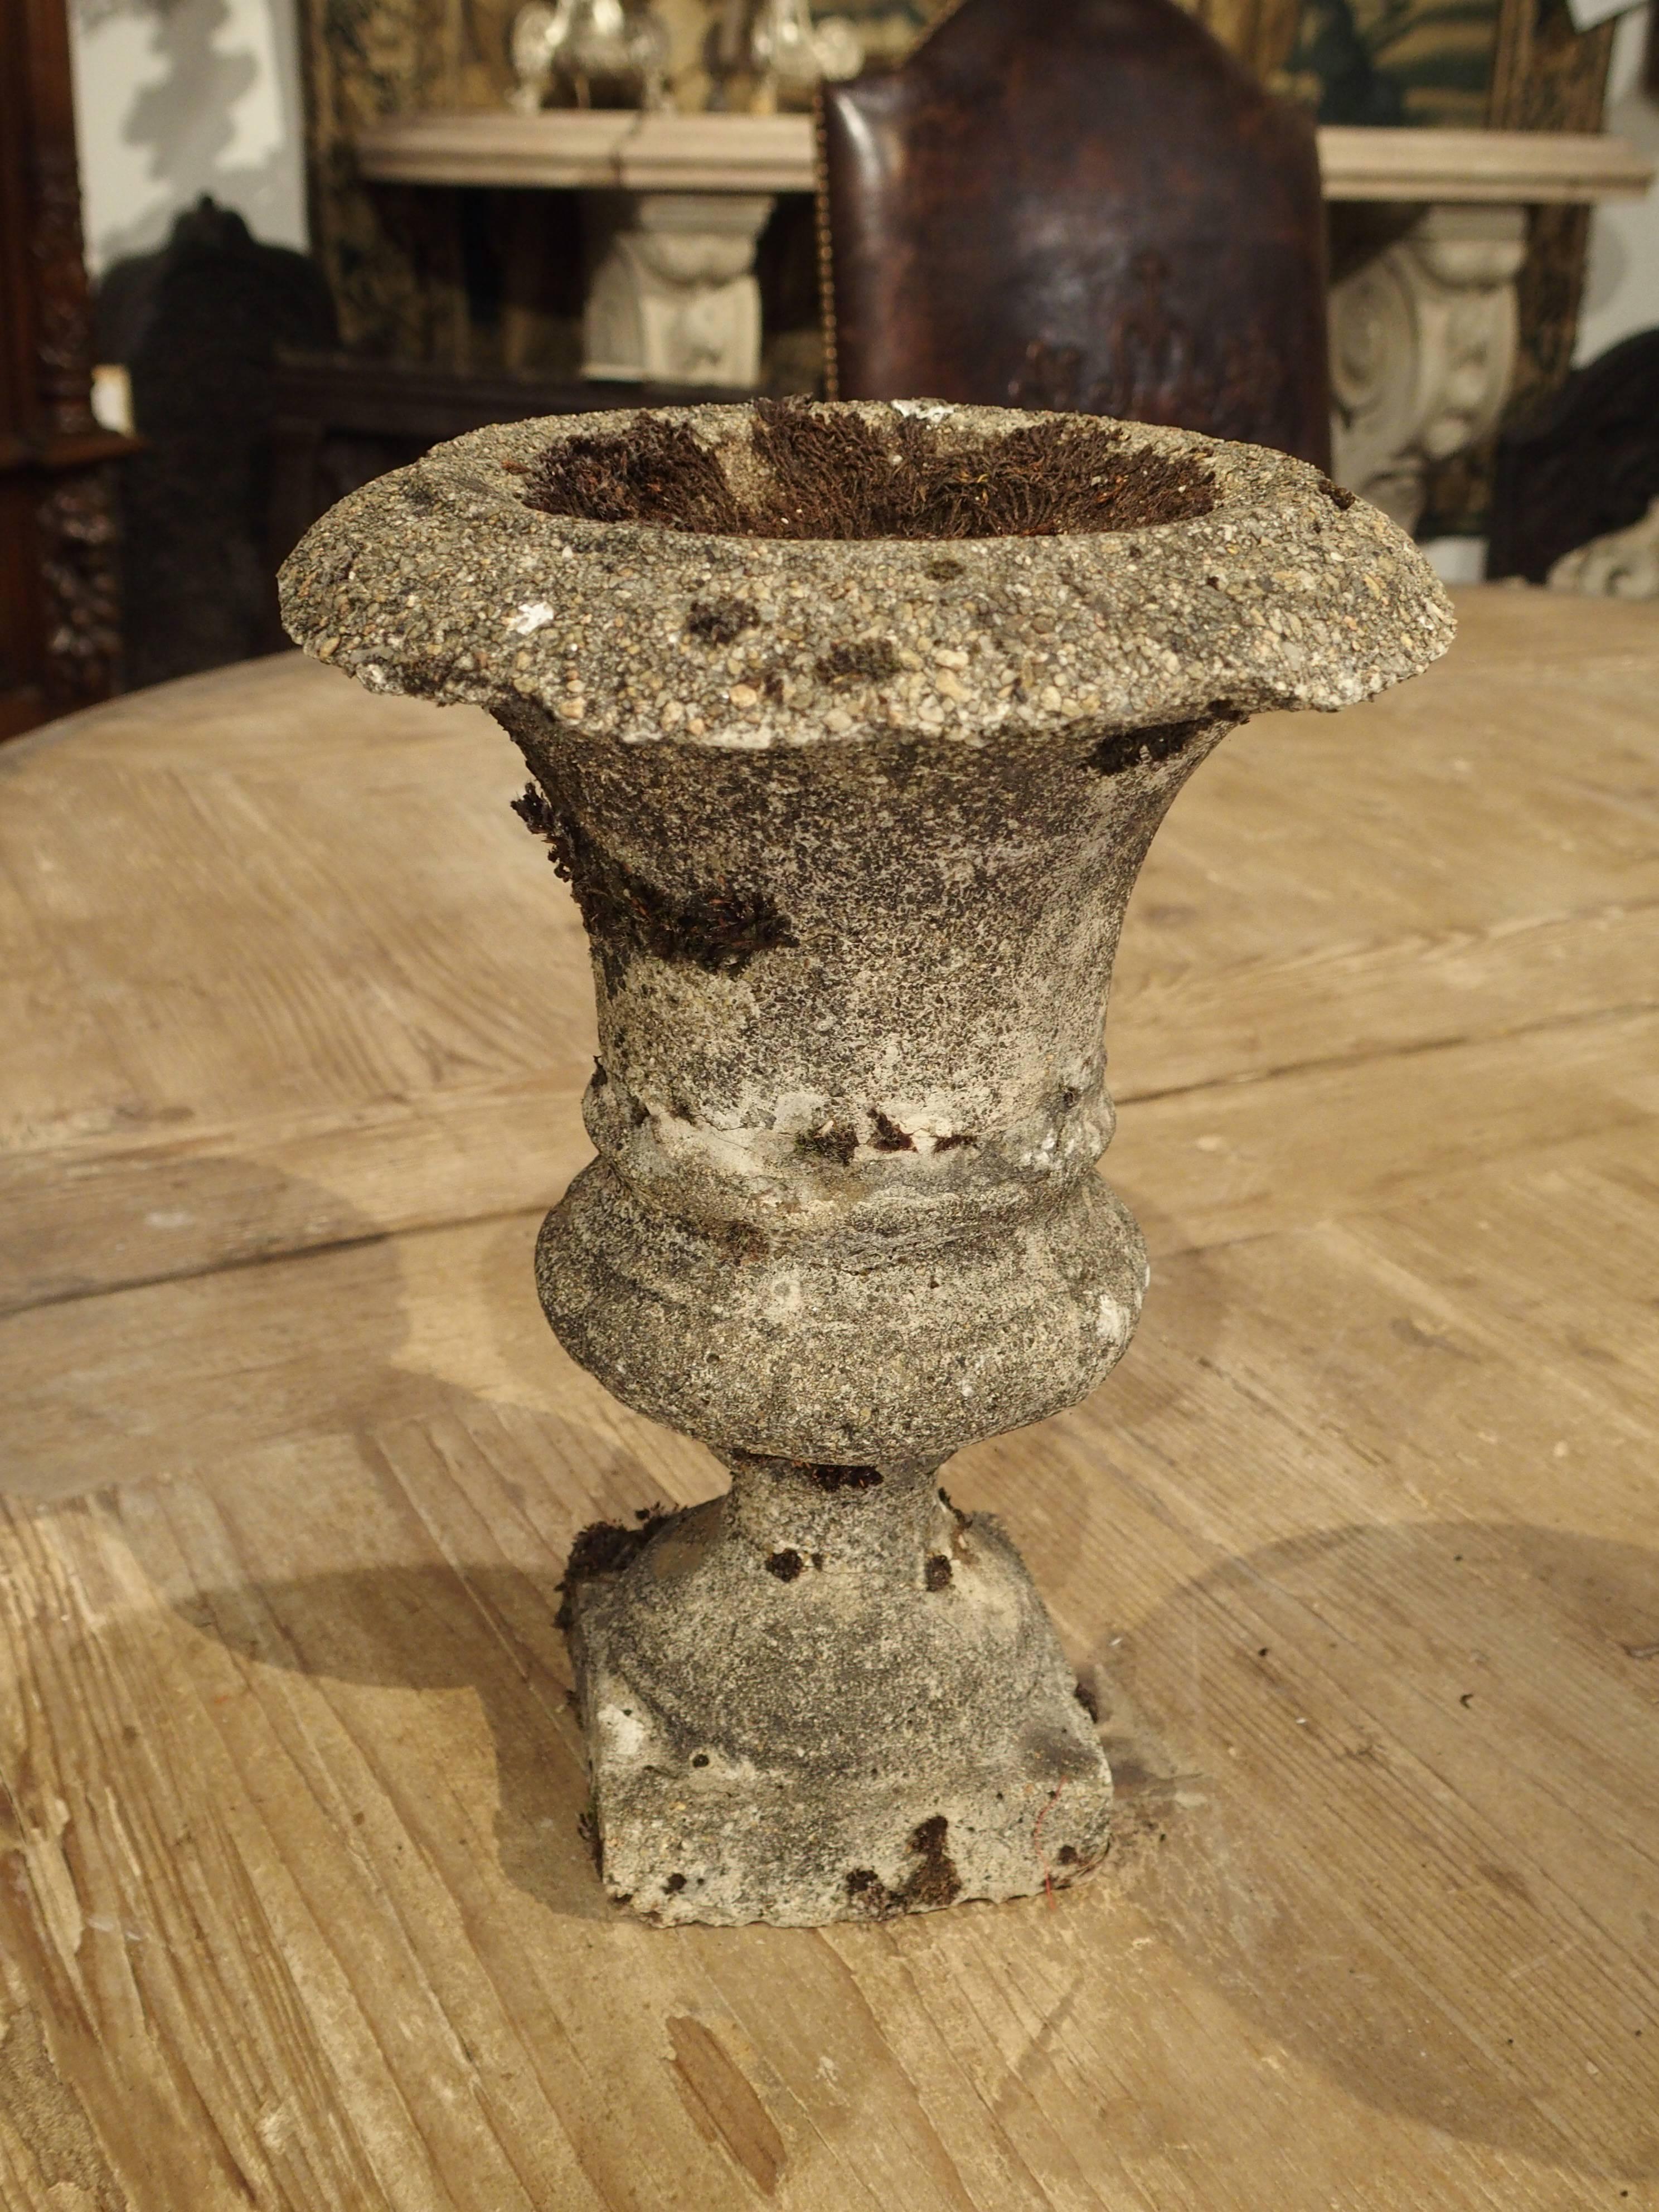 Early 20th Century Set of Three Small Reconstituted Stone Urns from France, circa 1900